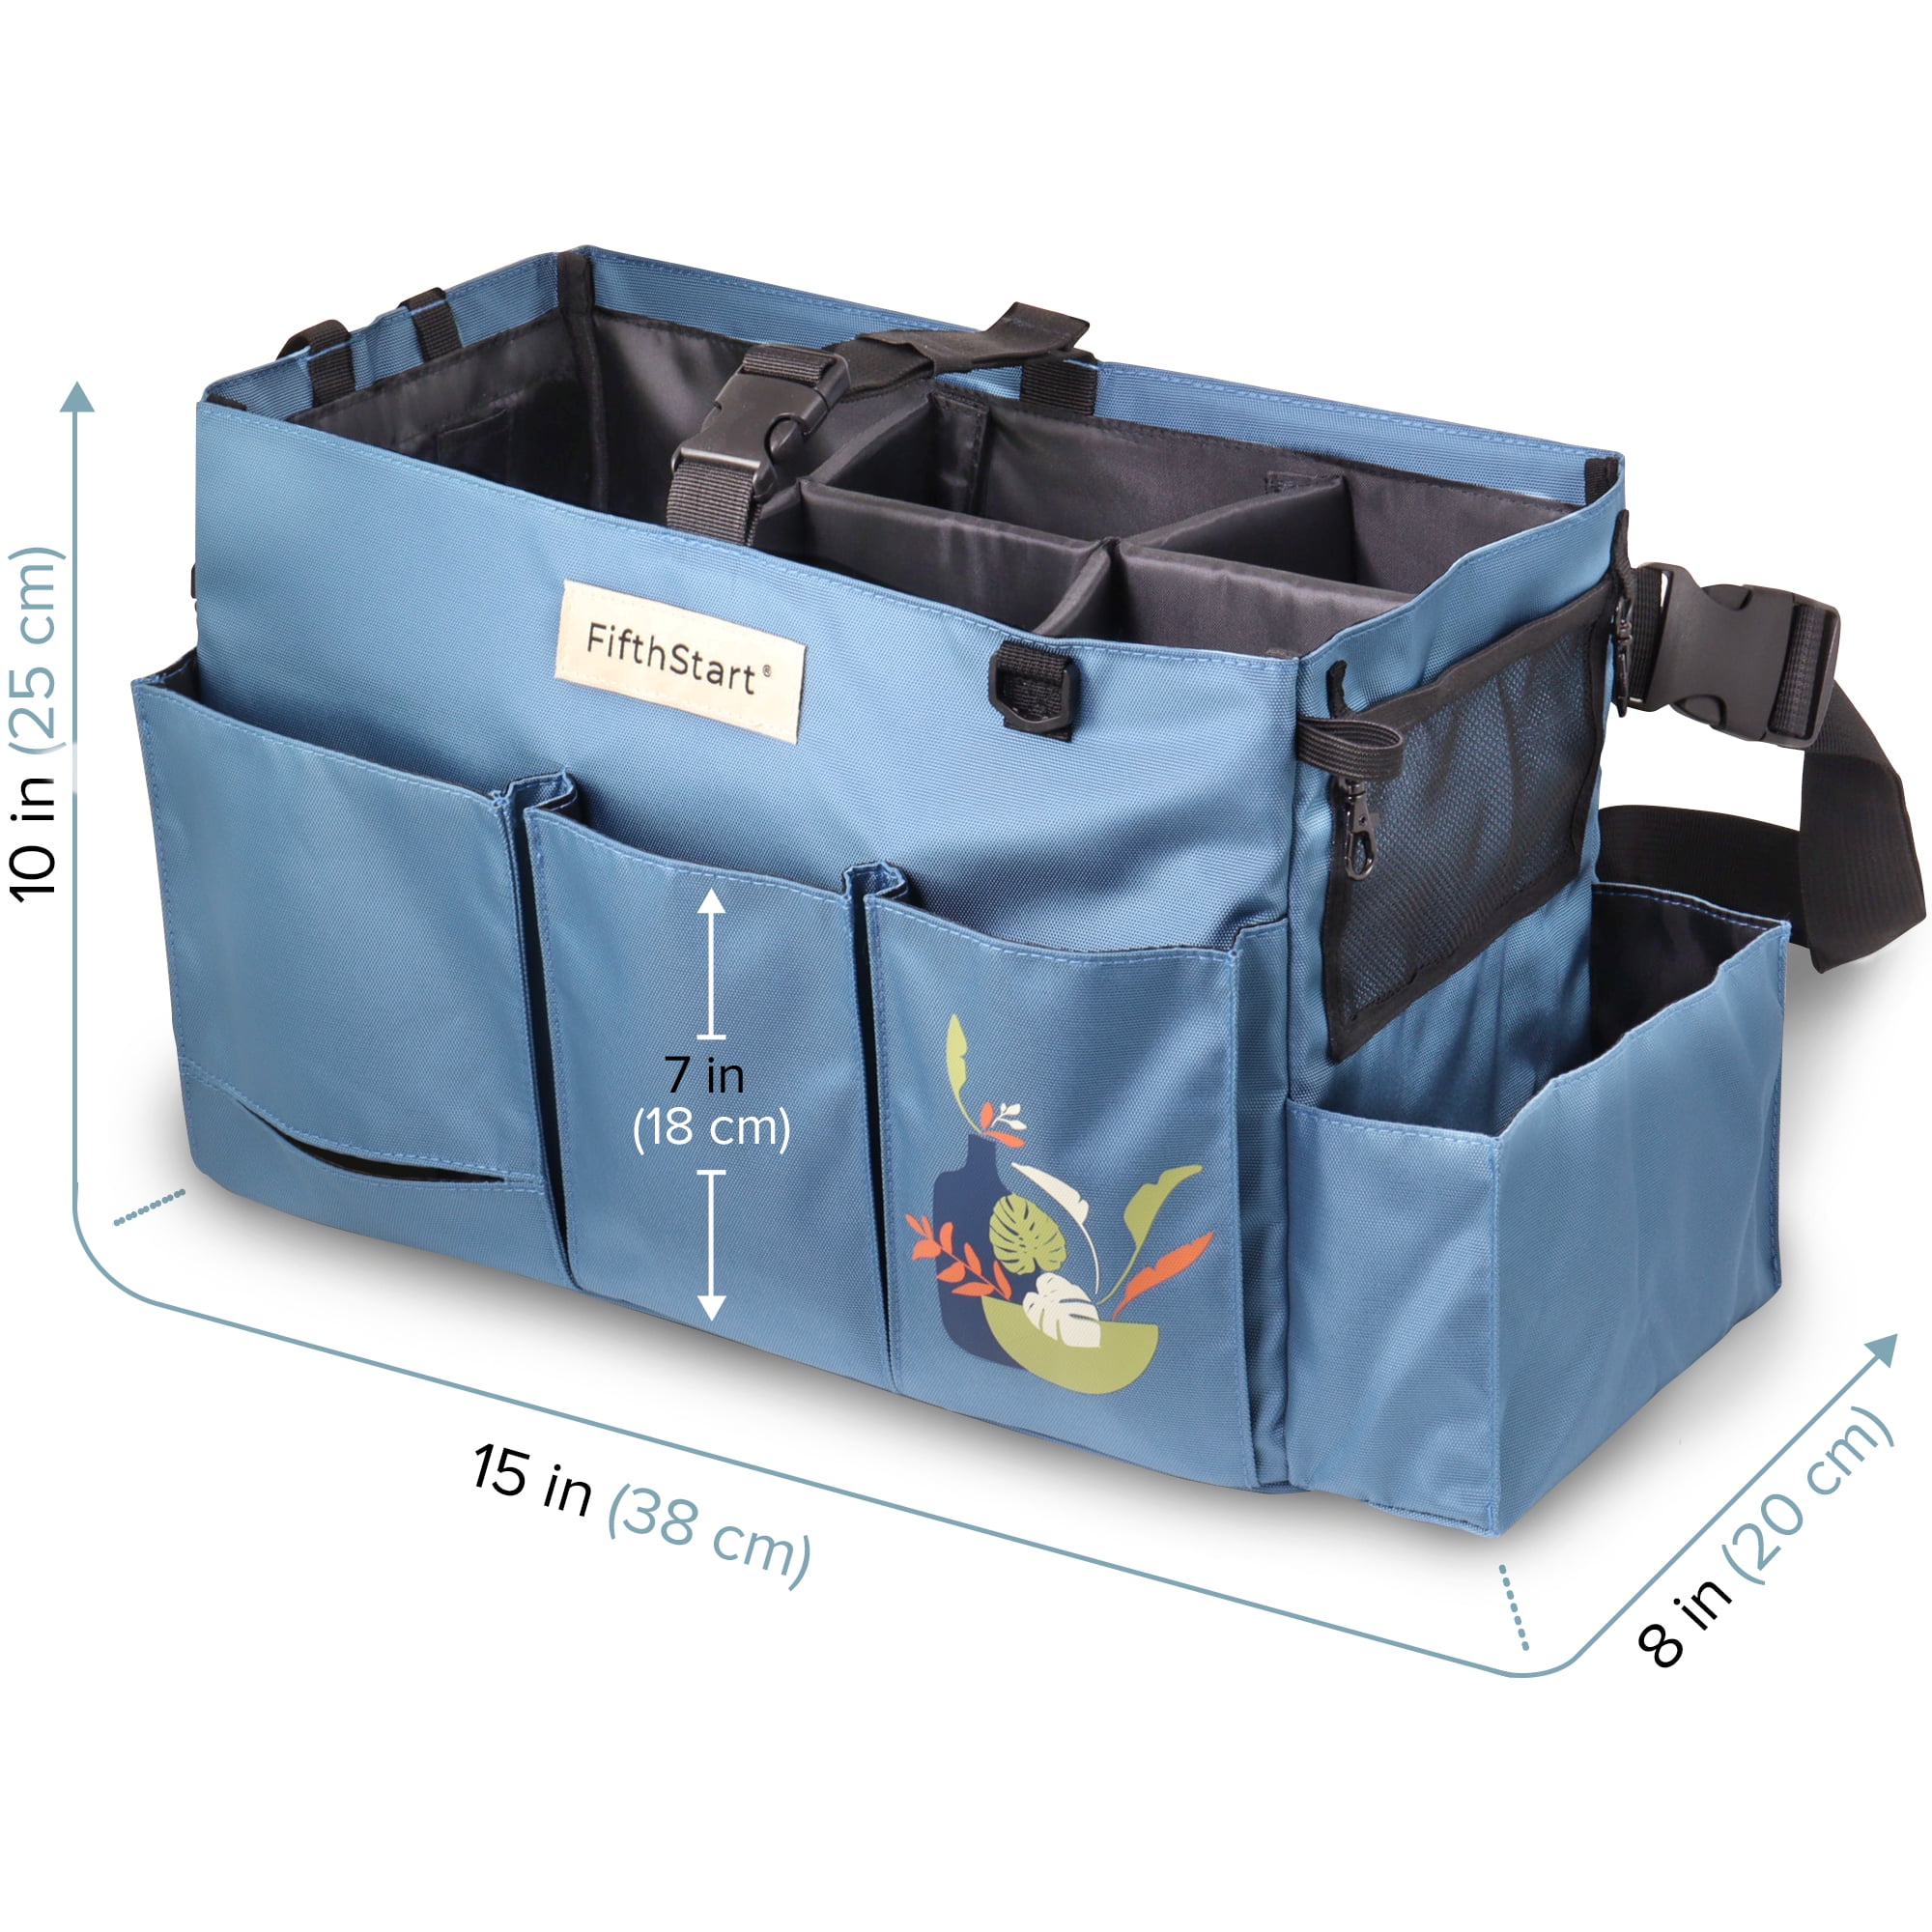 Large Wearable Cleaning Caddy Bag with Handle, Portable Organizer Cleaning  Supplies Organizer Bag with Shoulder & Waist Straps for Travel Bedroom  Bathroom Organizer Sky Blue 